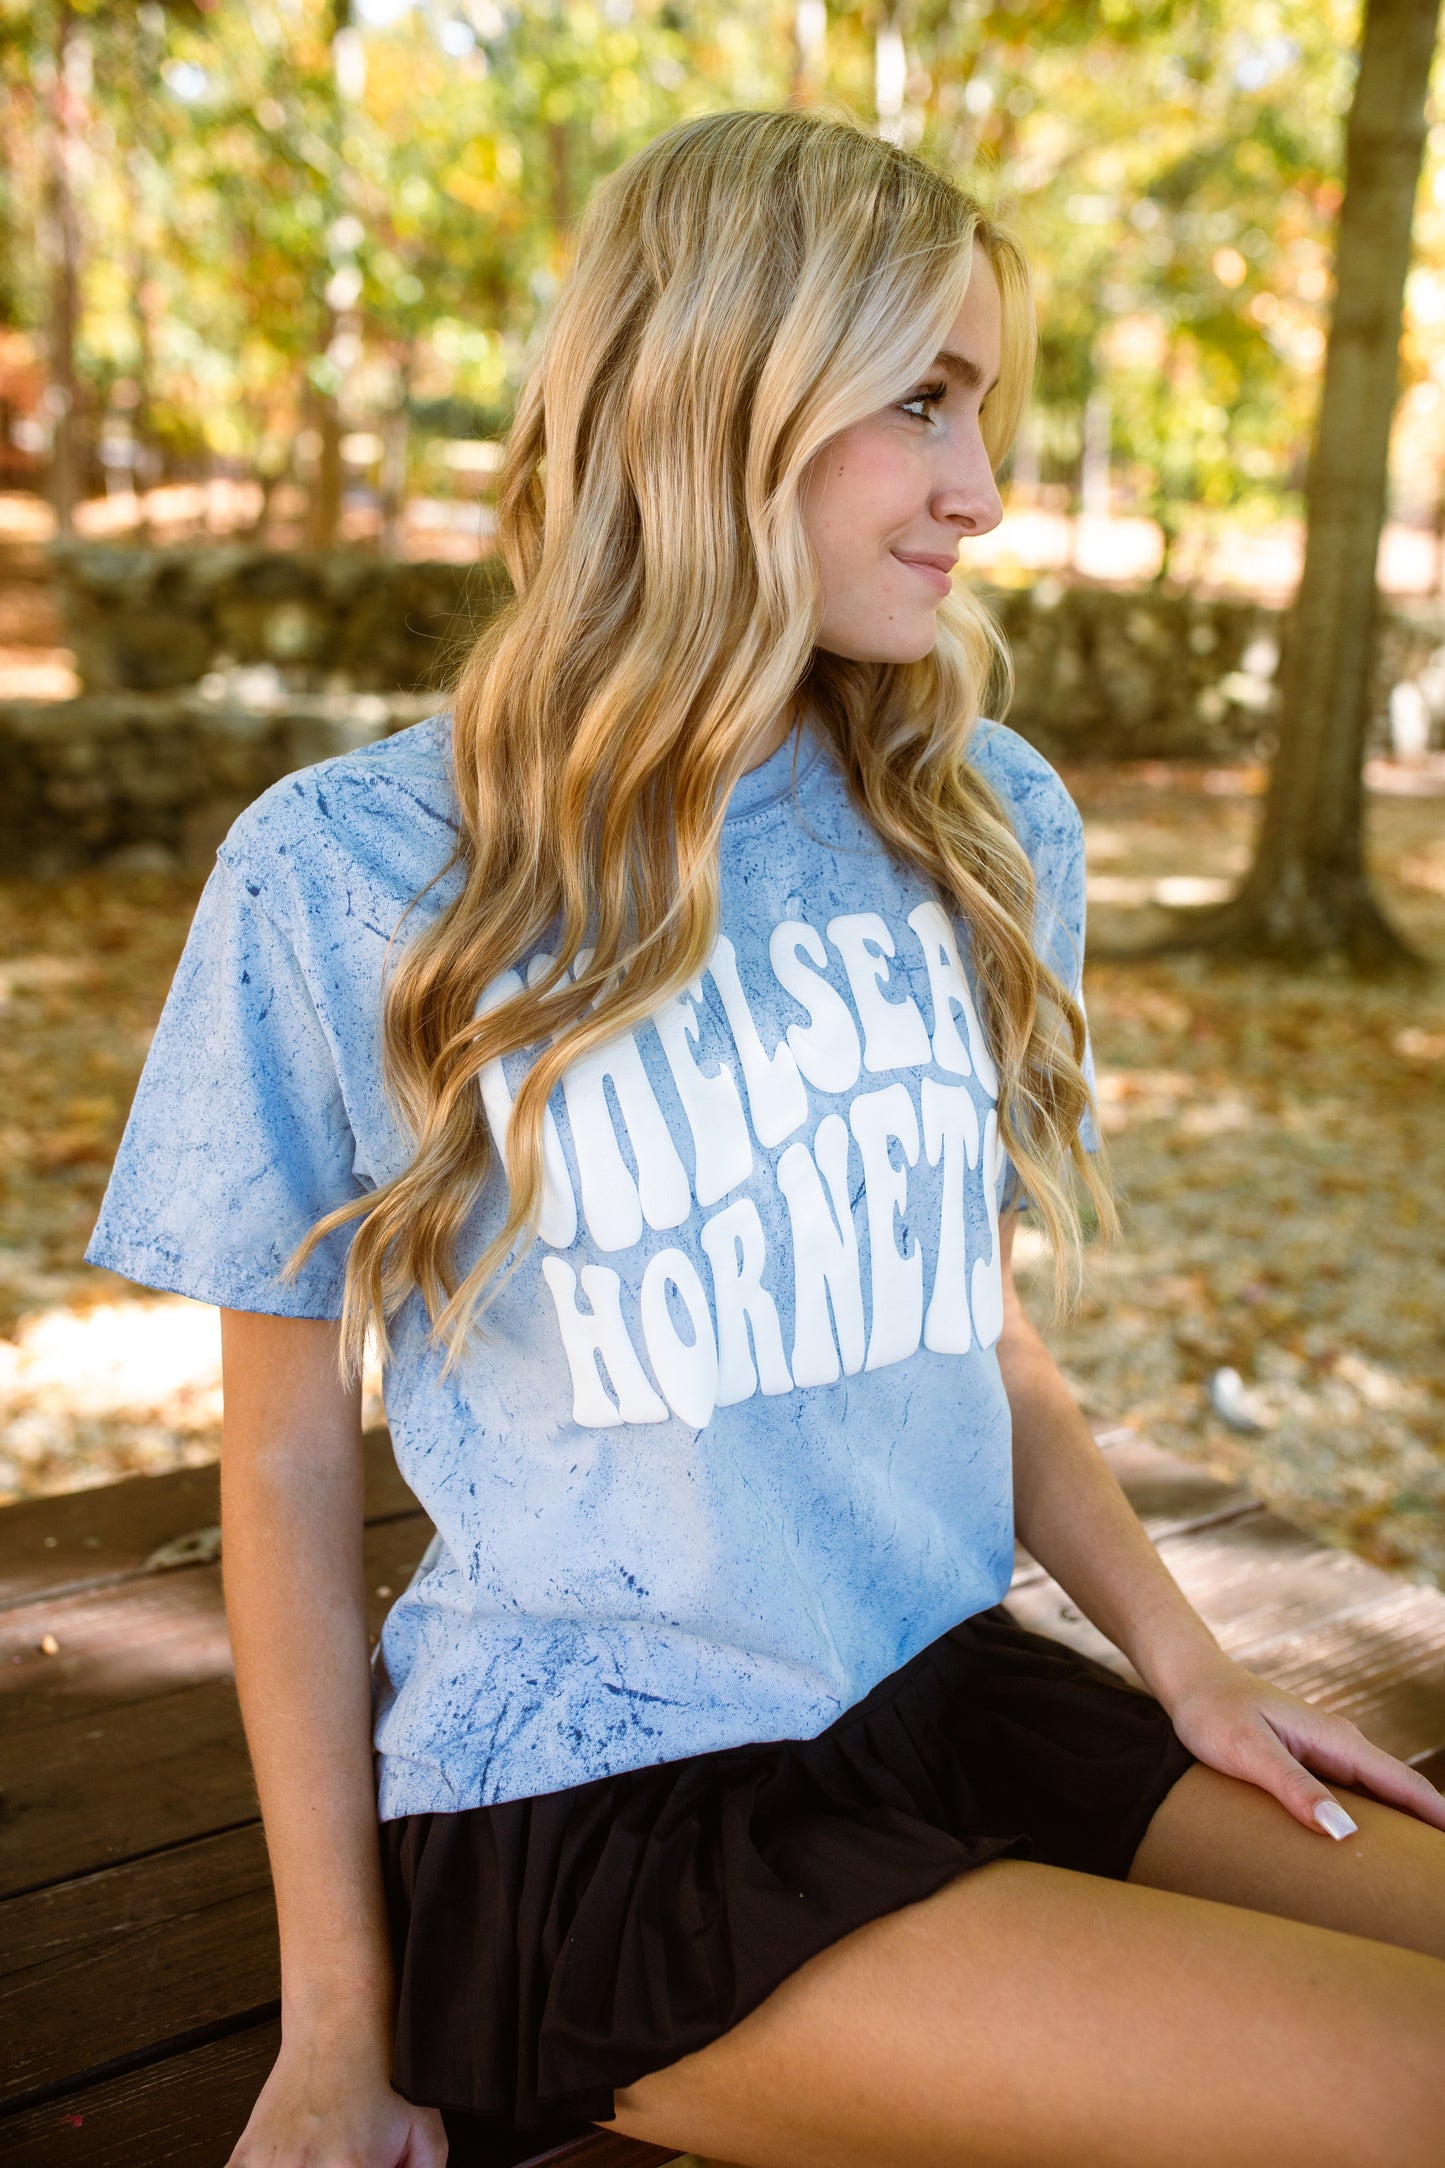 Mineral Wash Chelsea Hornet Puff Tee